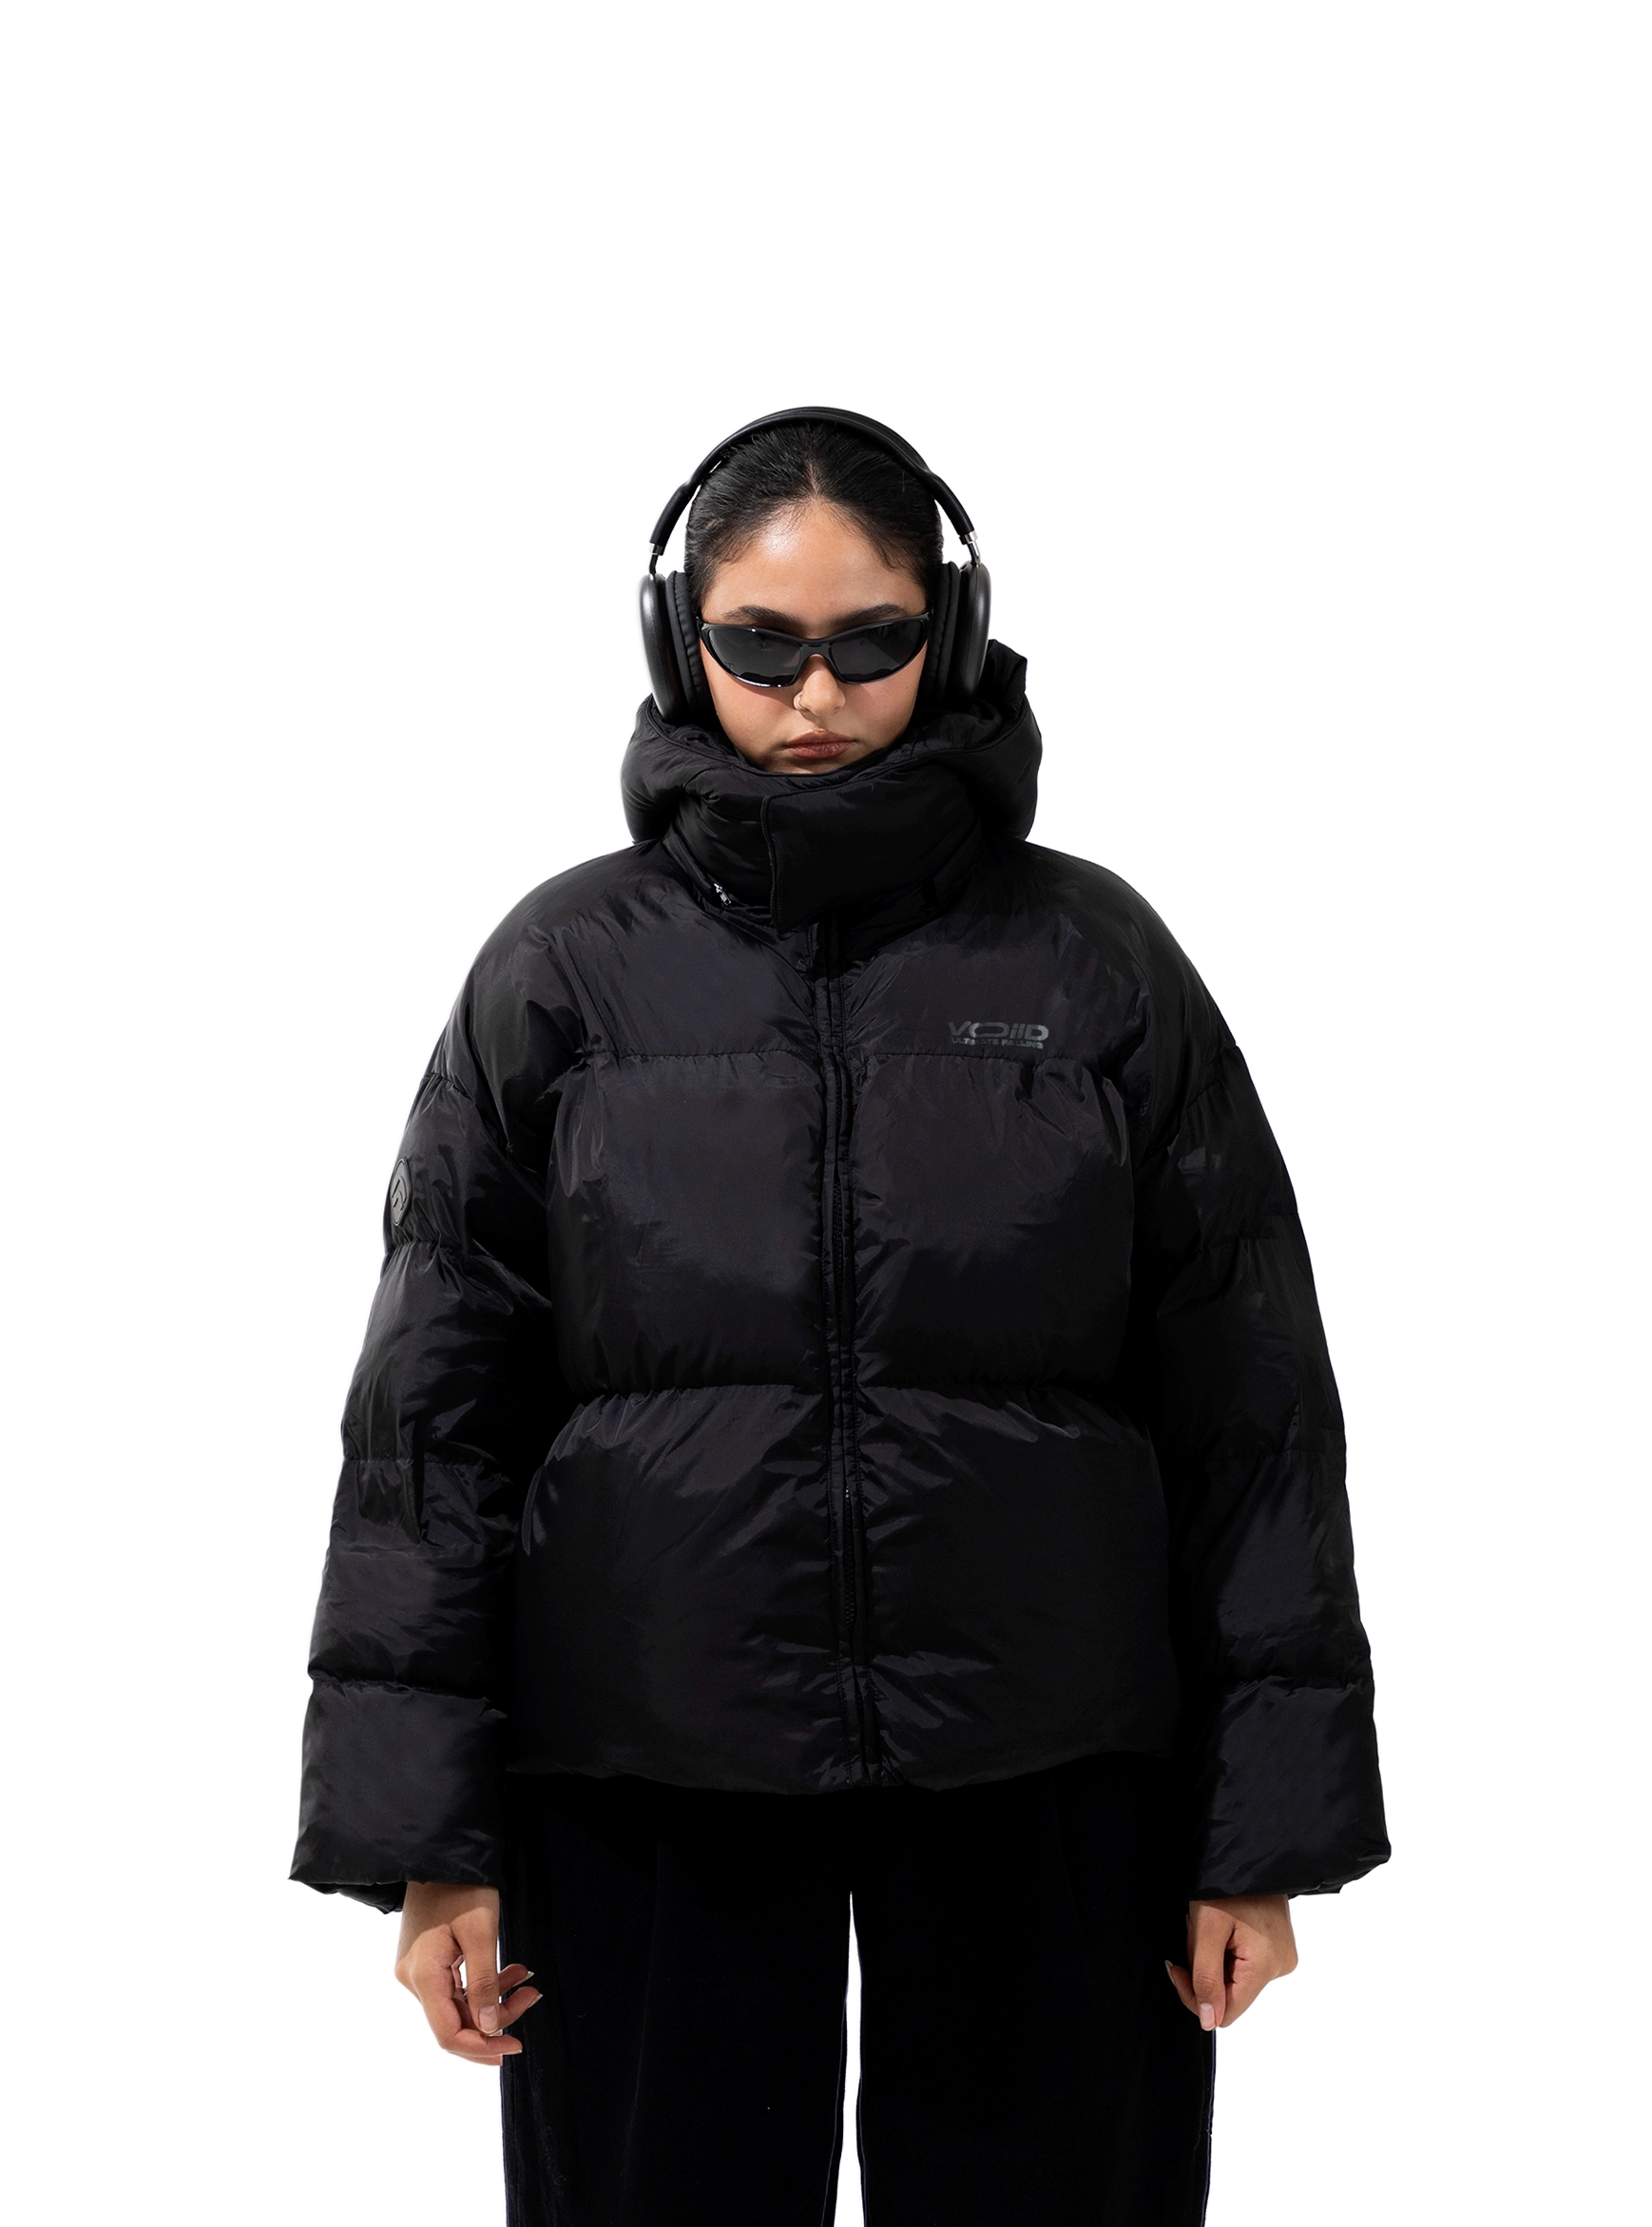 Voiid - Puffer Jacket